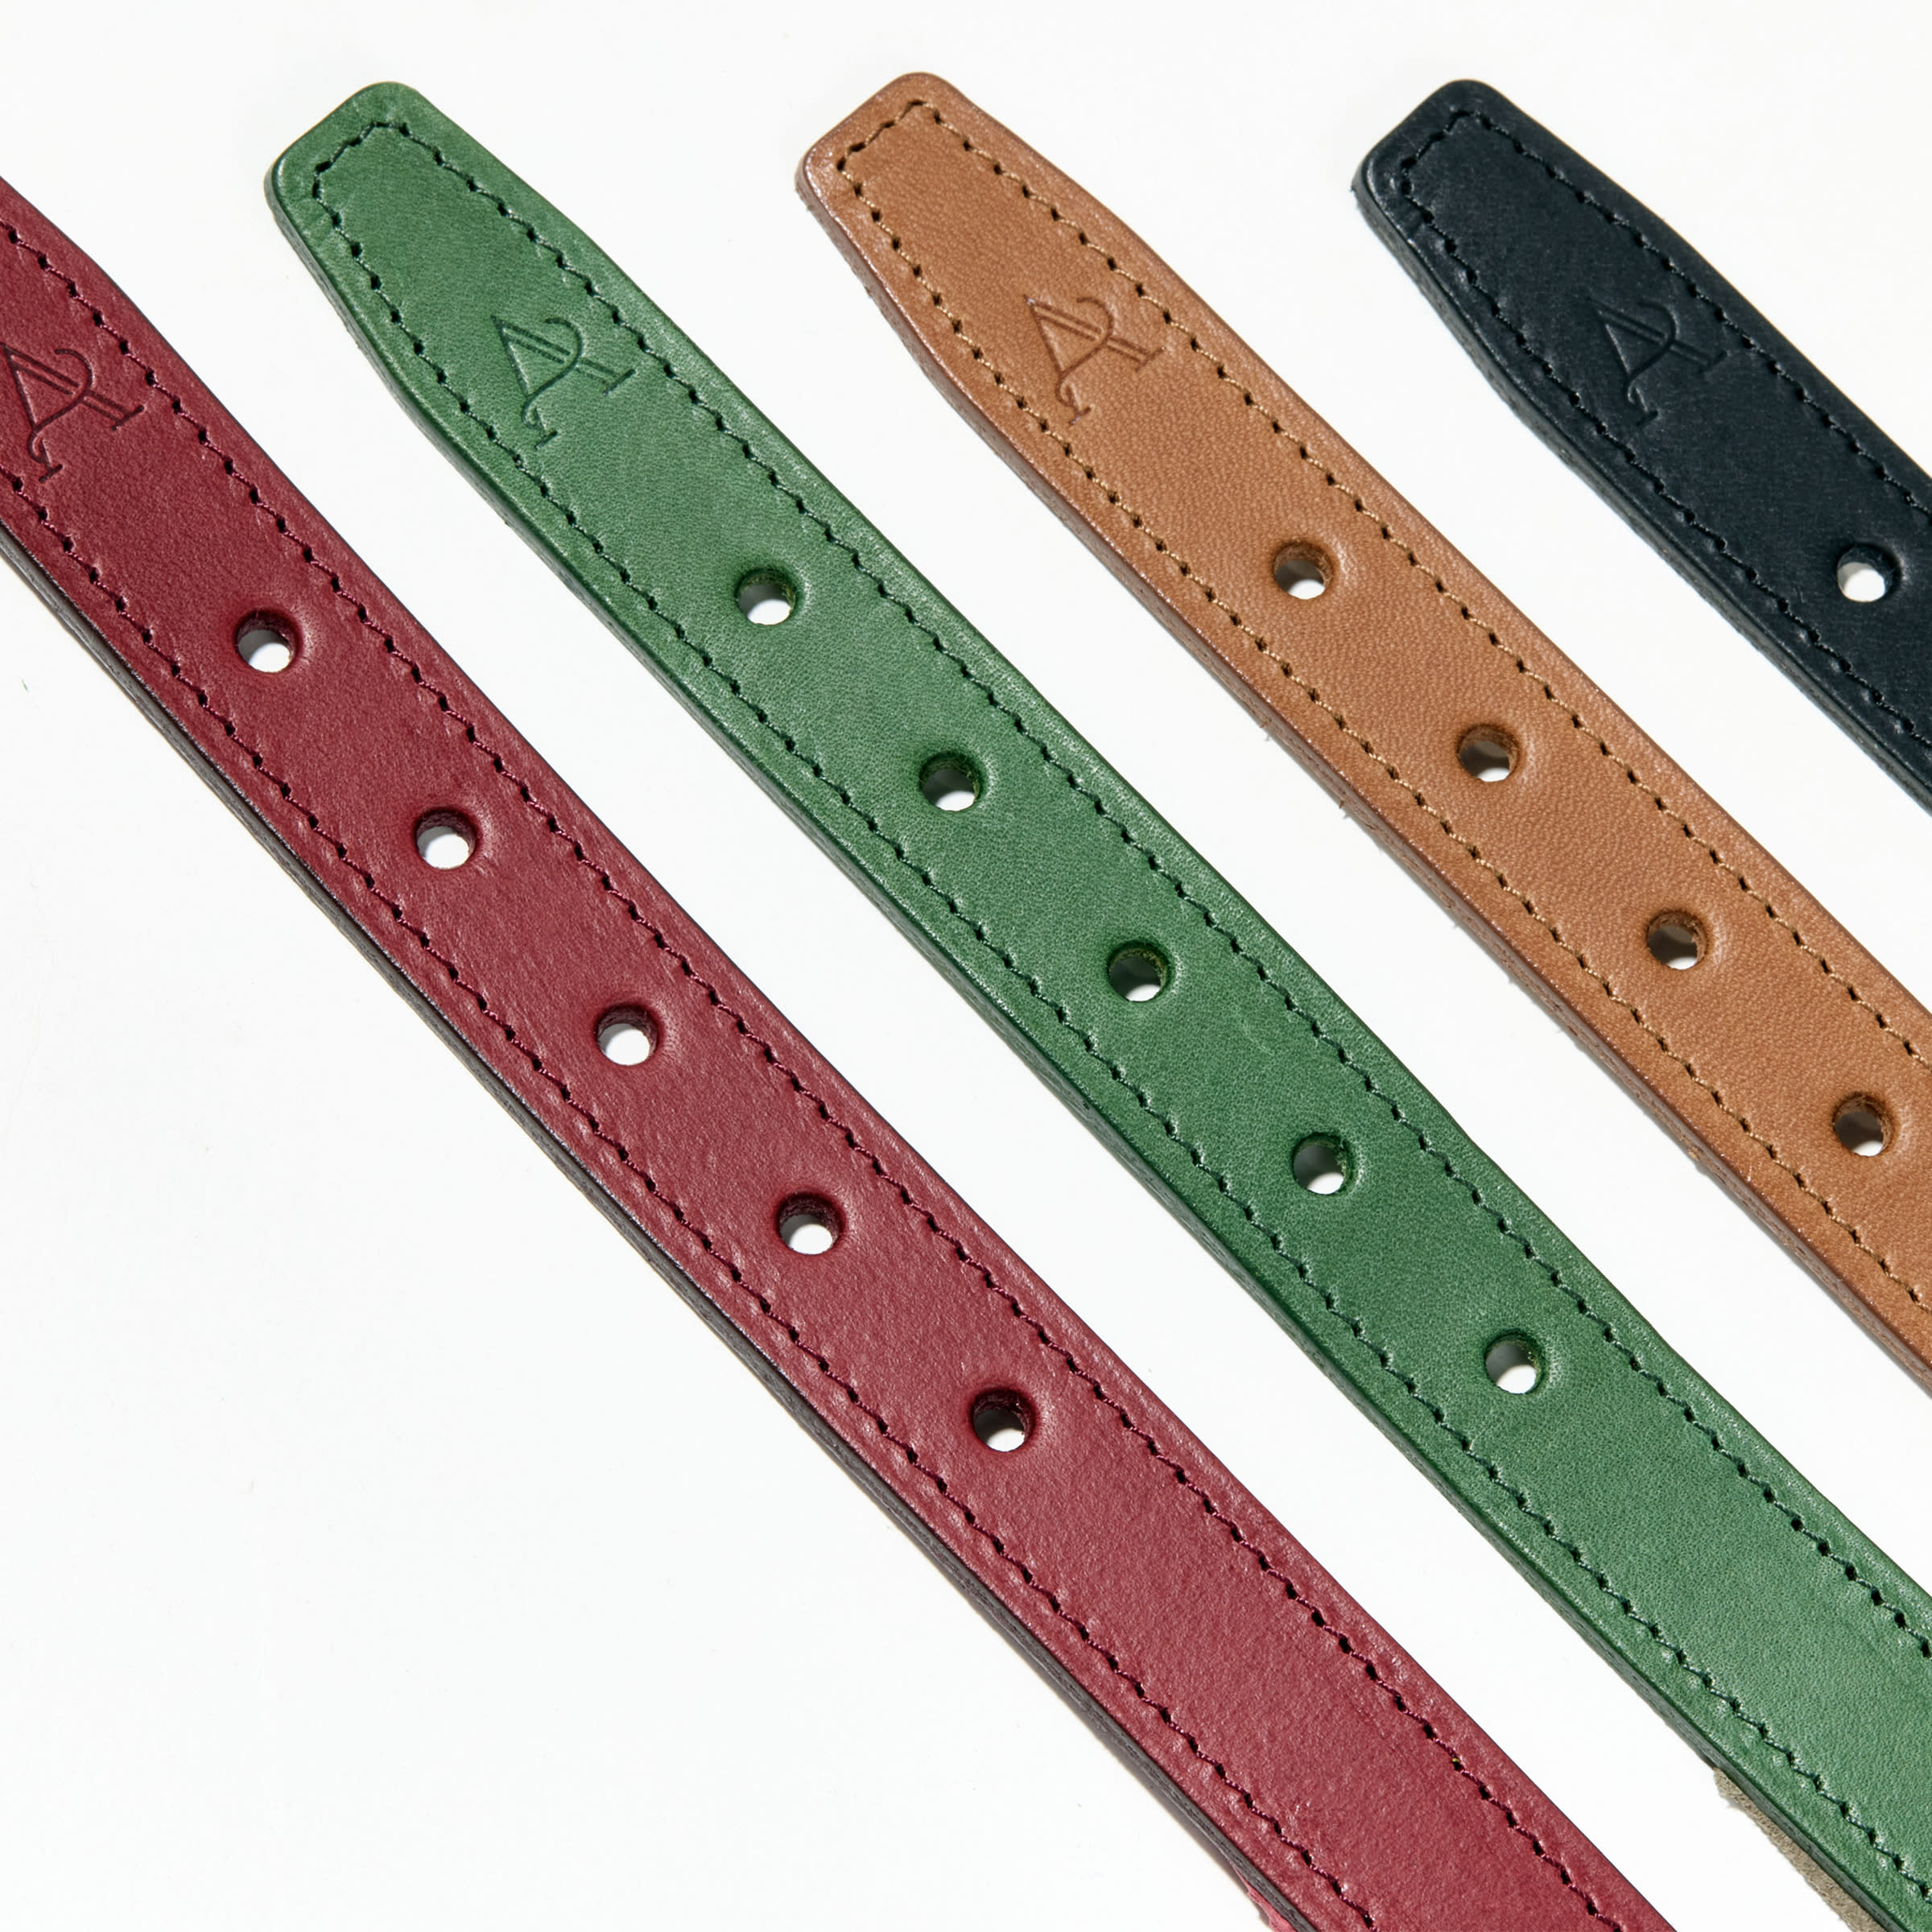 Padded Leather Dog Collar (Red)